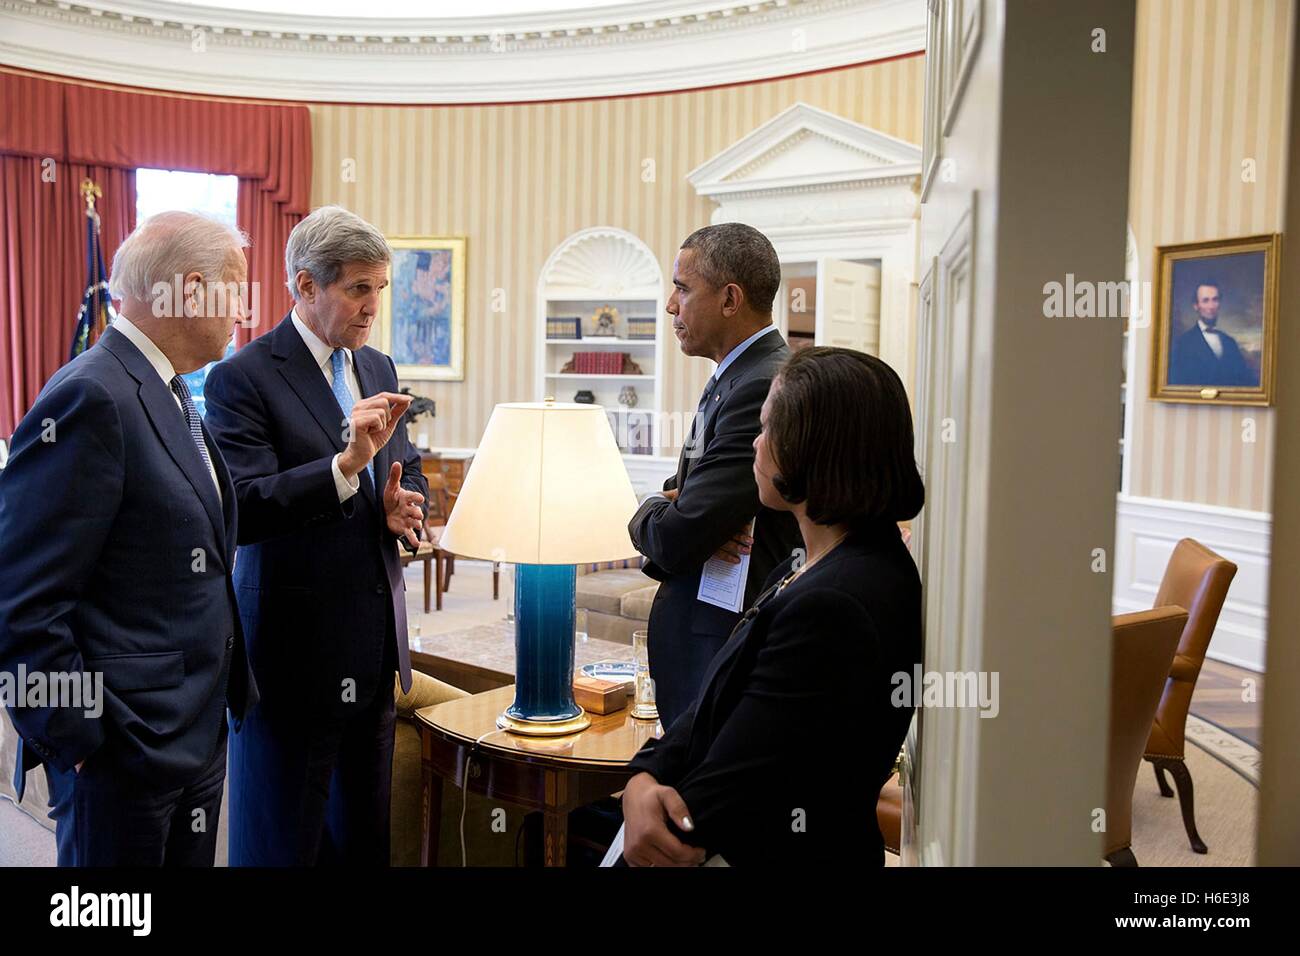 U.S. President Barack Obama, Vice President Joe Biden, and National Security Advisor Susan Rice listen to Secretary of State John Kerry in the White House Oval Office March 9, 2015 in Washington, DC. Stock Photo